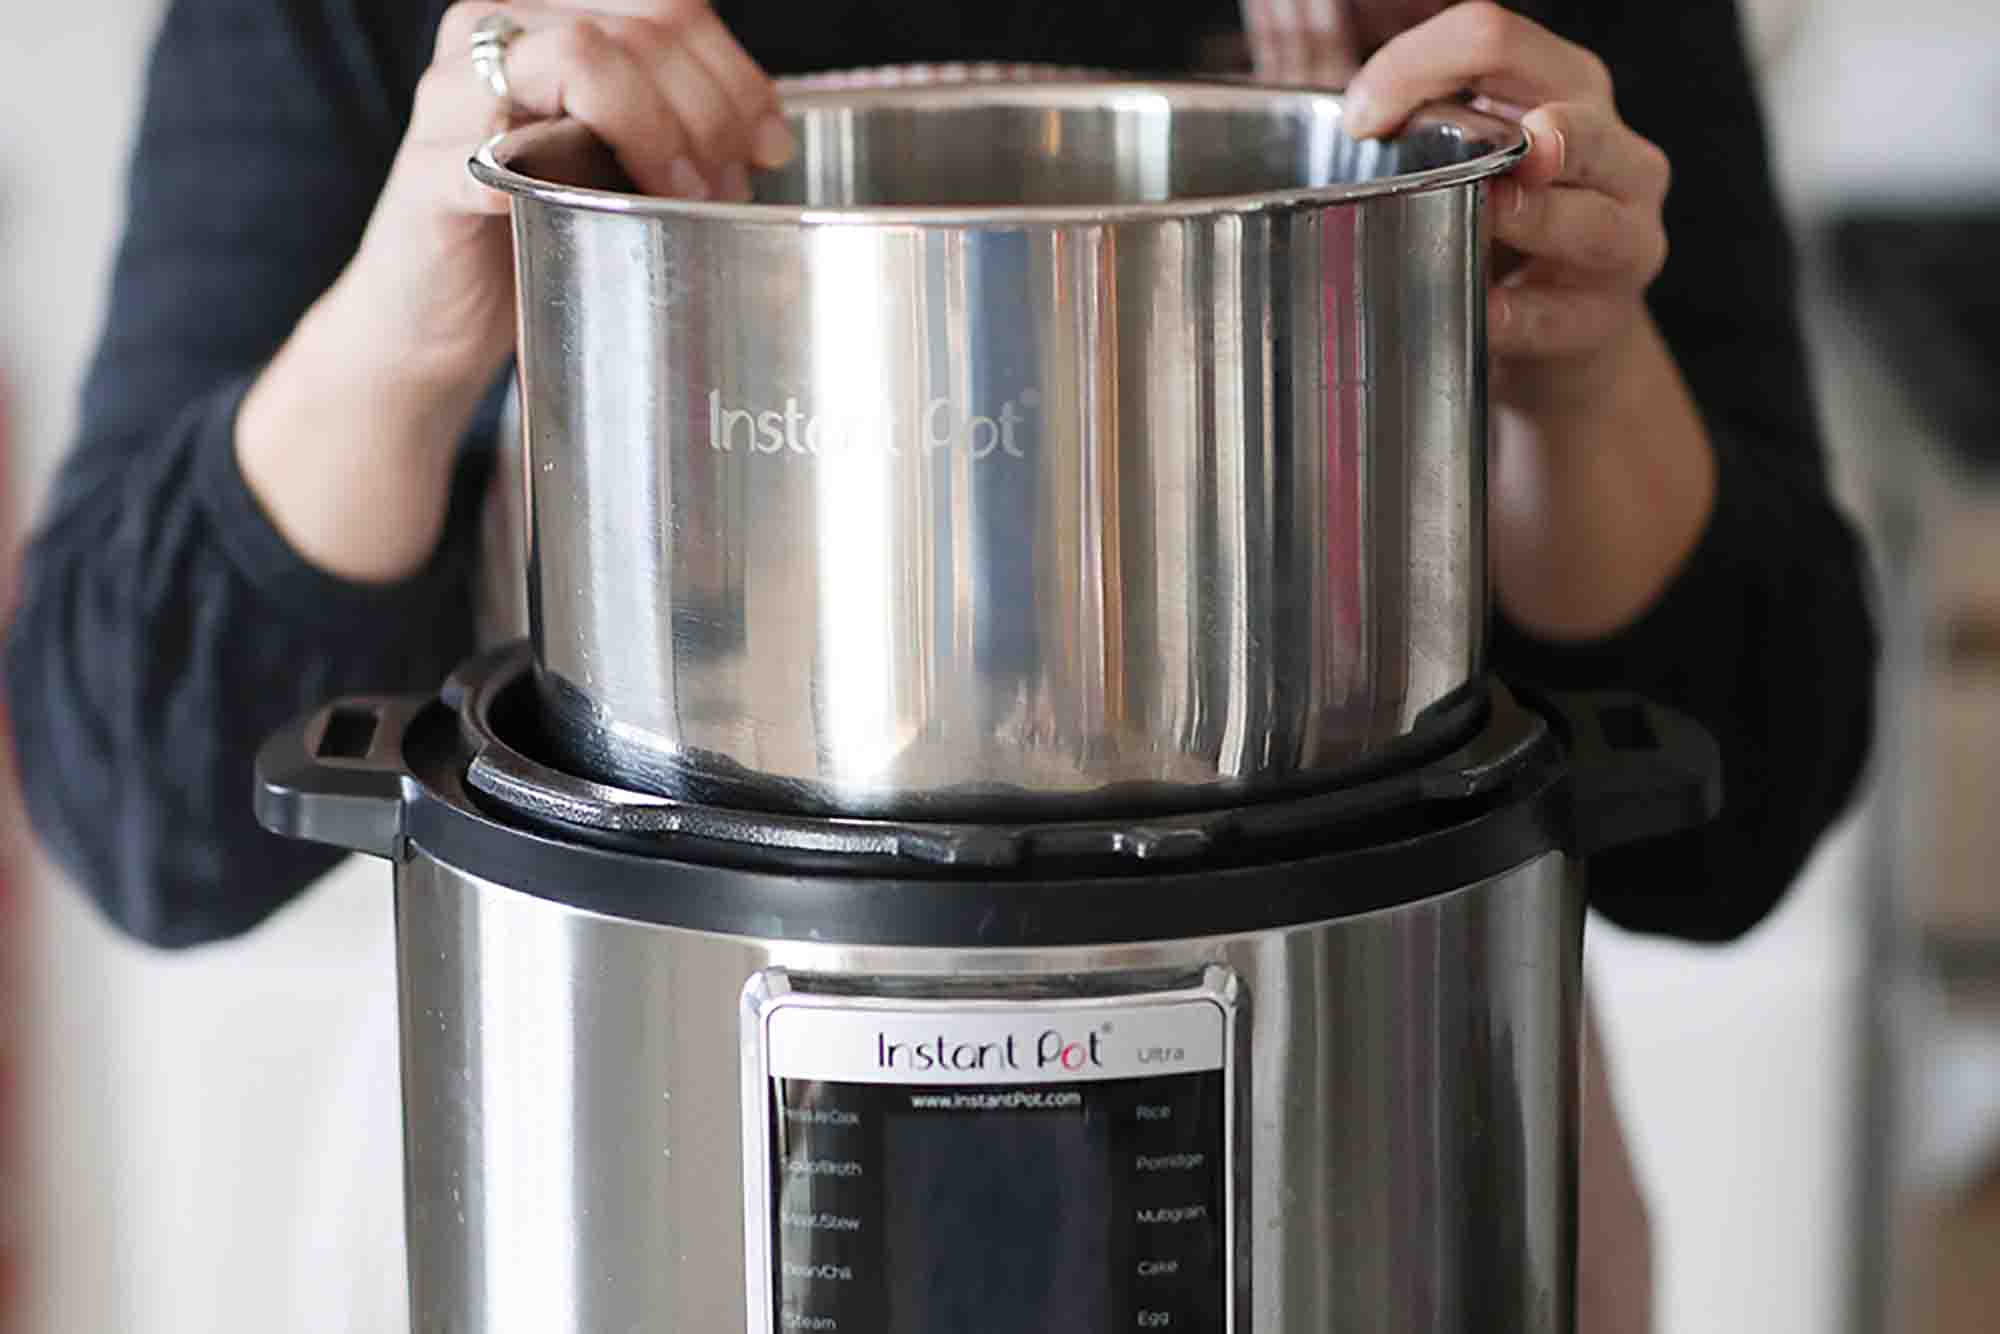 Guide to the Instant Pot - How to insert the inner pot